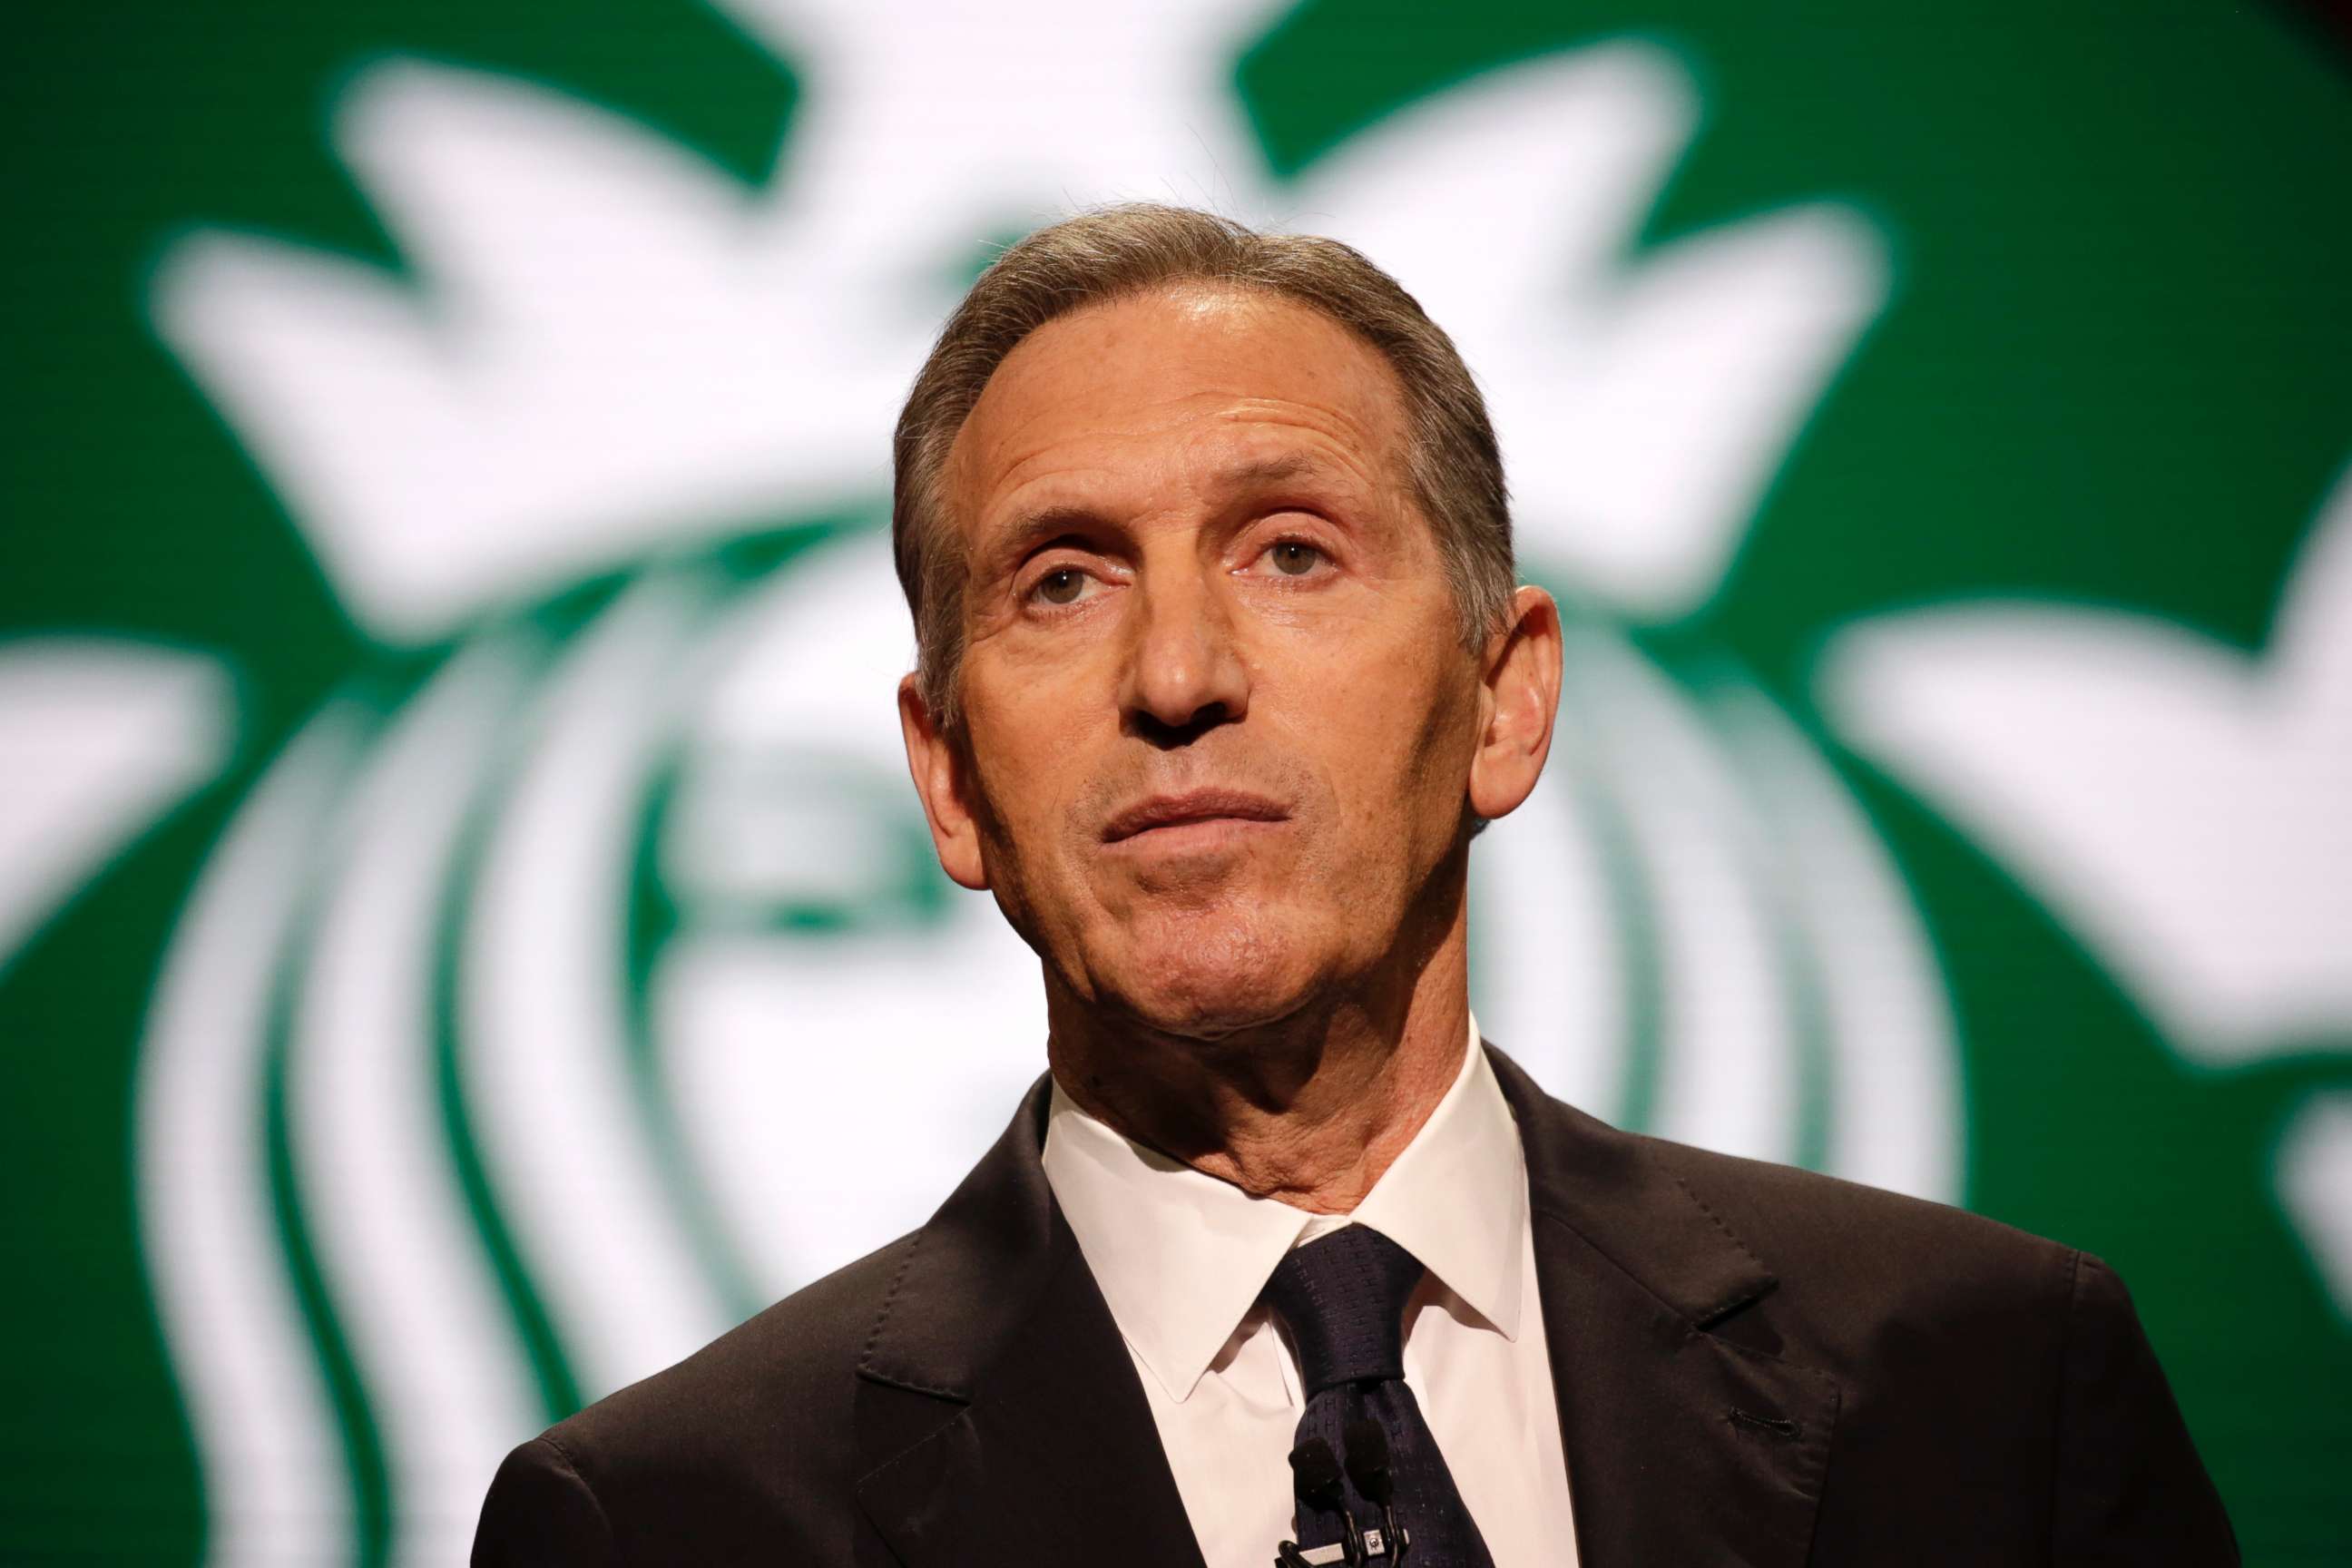 PHOTO: Starbucks Chairman and CEO Howard Schultz speaks at the Annual Meeting of Shareholders in Seattle, March 22, 2017. 